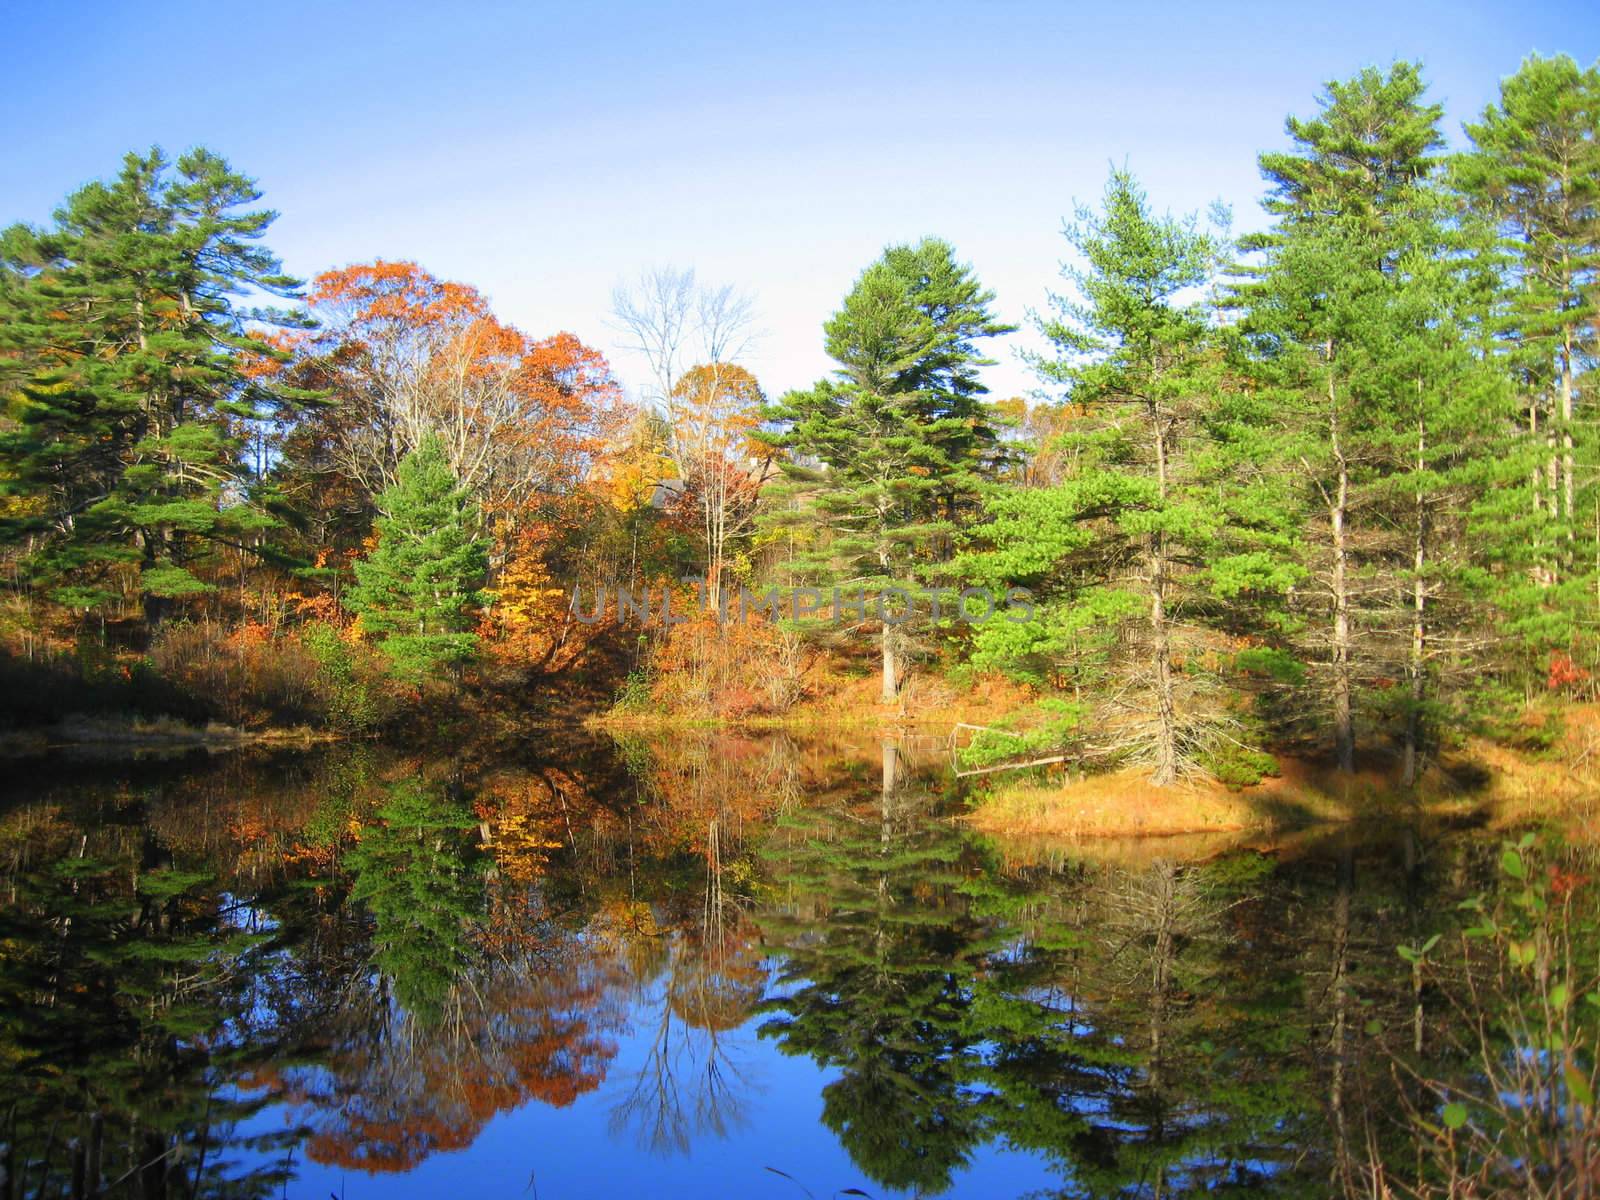 along a backroad in Maine, a quiet pond showing reflections of trees